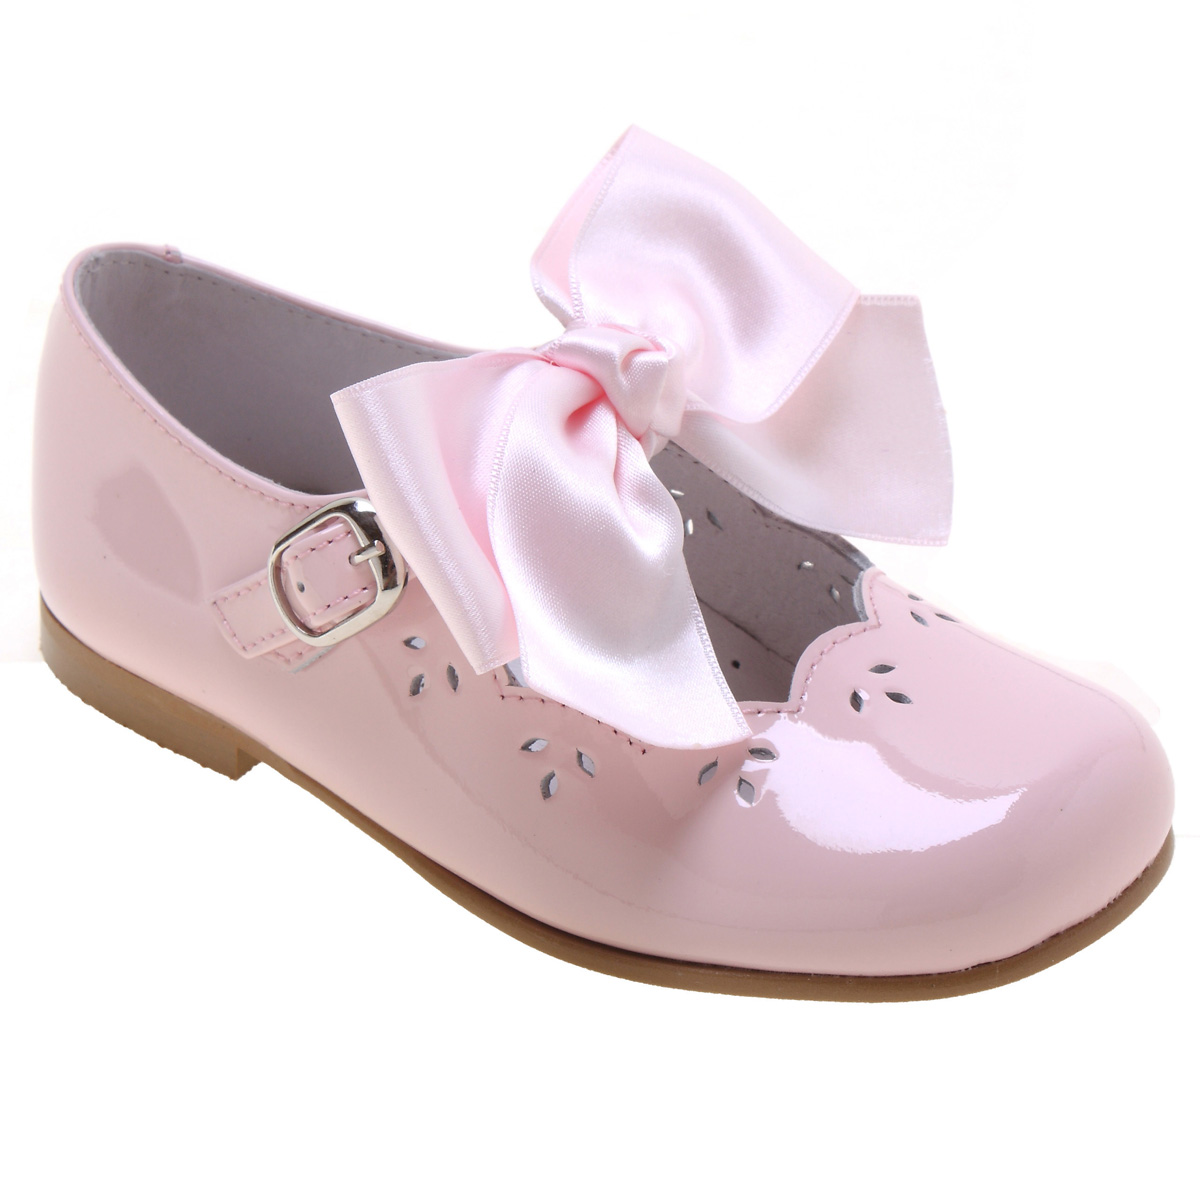 BABY GIRL SPANISH STYLE PINK WHITE PATENT MARY JANE BOW CHRISTENING PARTY SHOES 